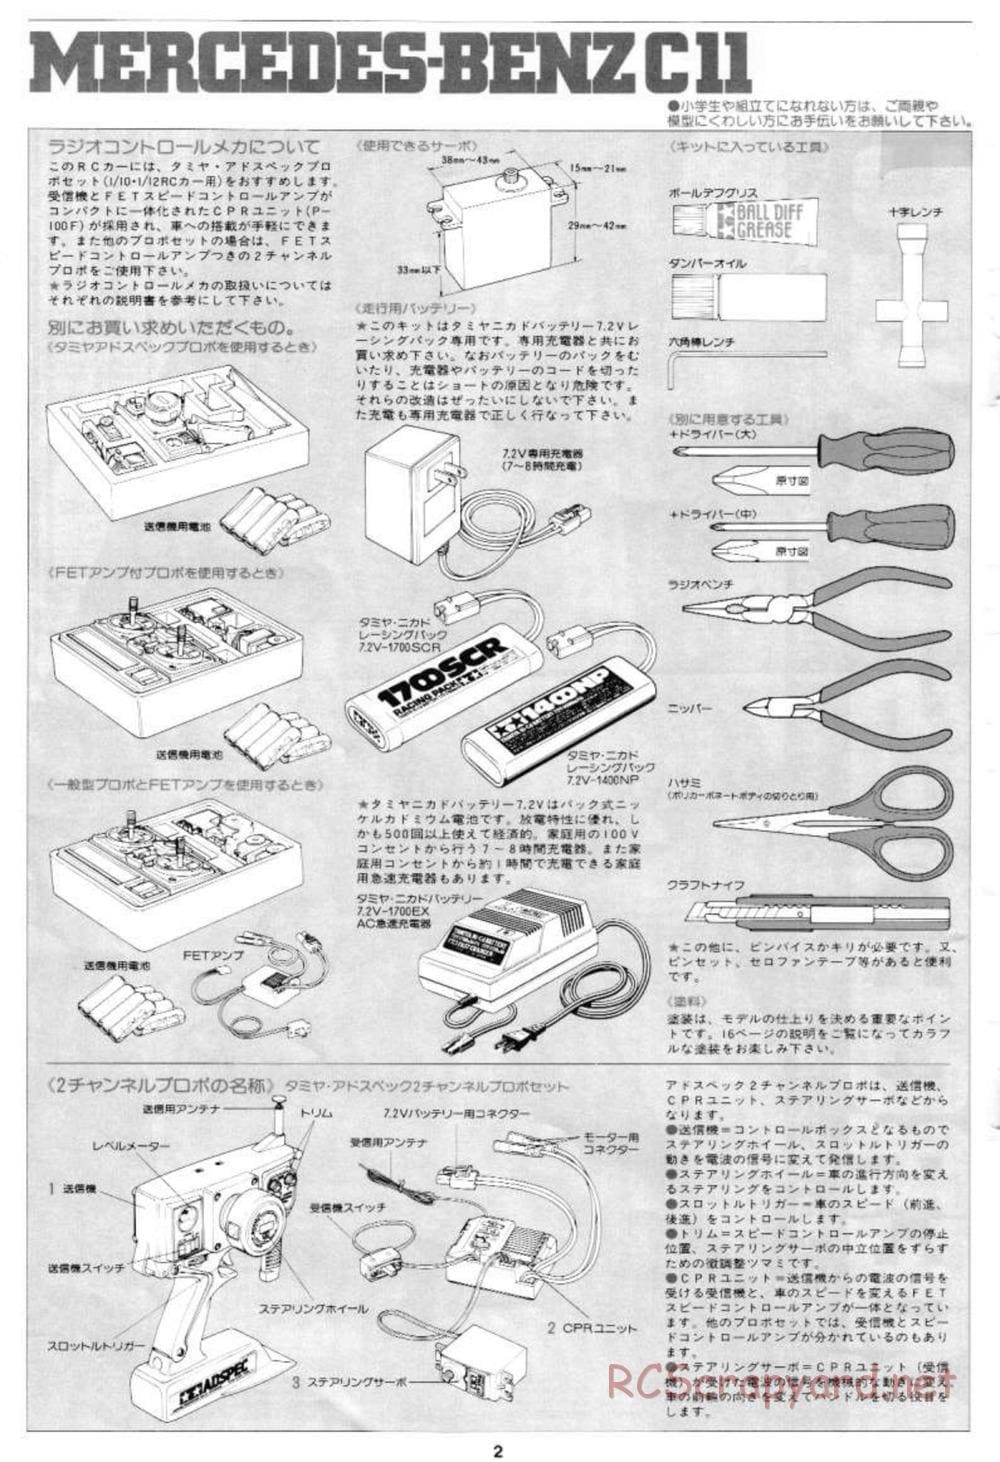 Tamiya - Mercedes-Benz C11 - Group-C Chassis - Manual - Page 2